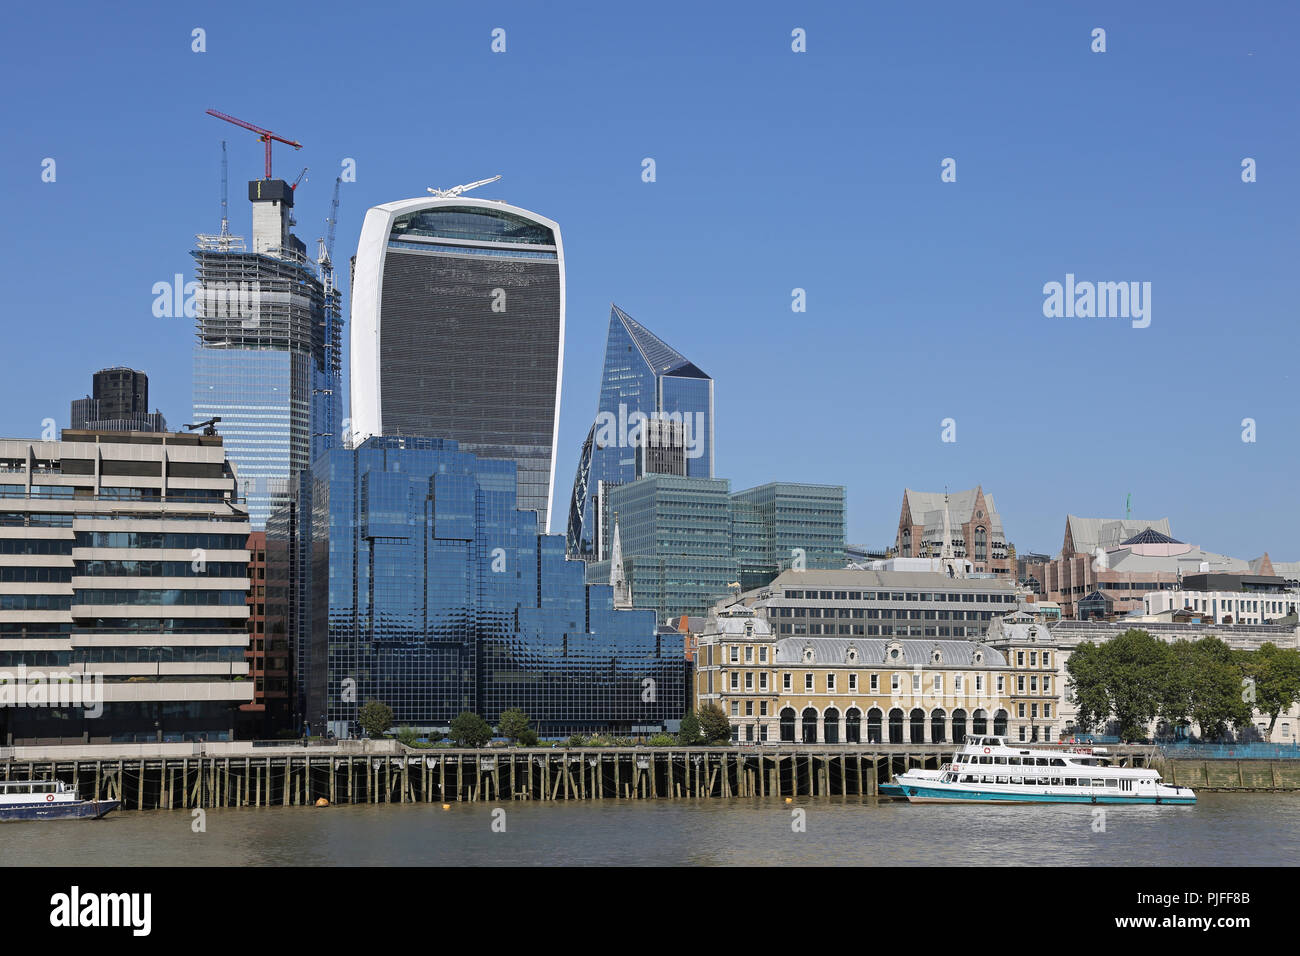 City of London Skyline from the River Thames showing the 'Walkie-Talkie' building, centre, and the old Billingsgate Fish Market, right. Stock Photo